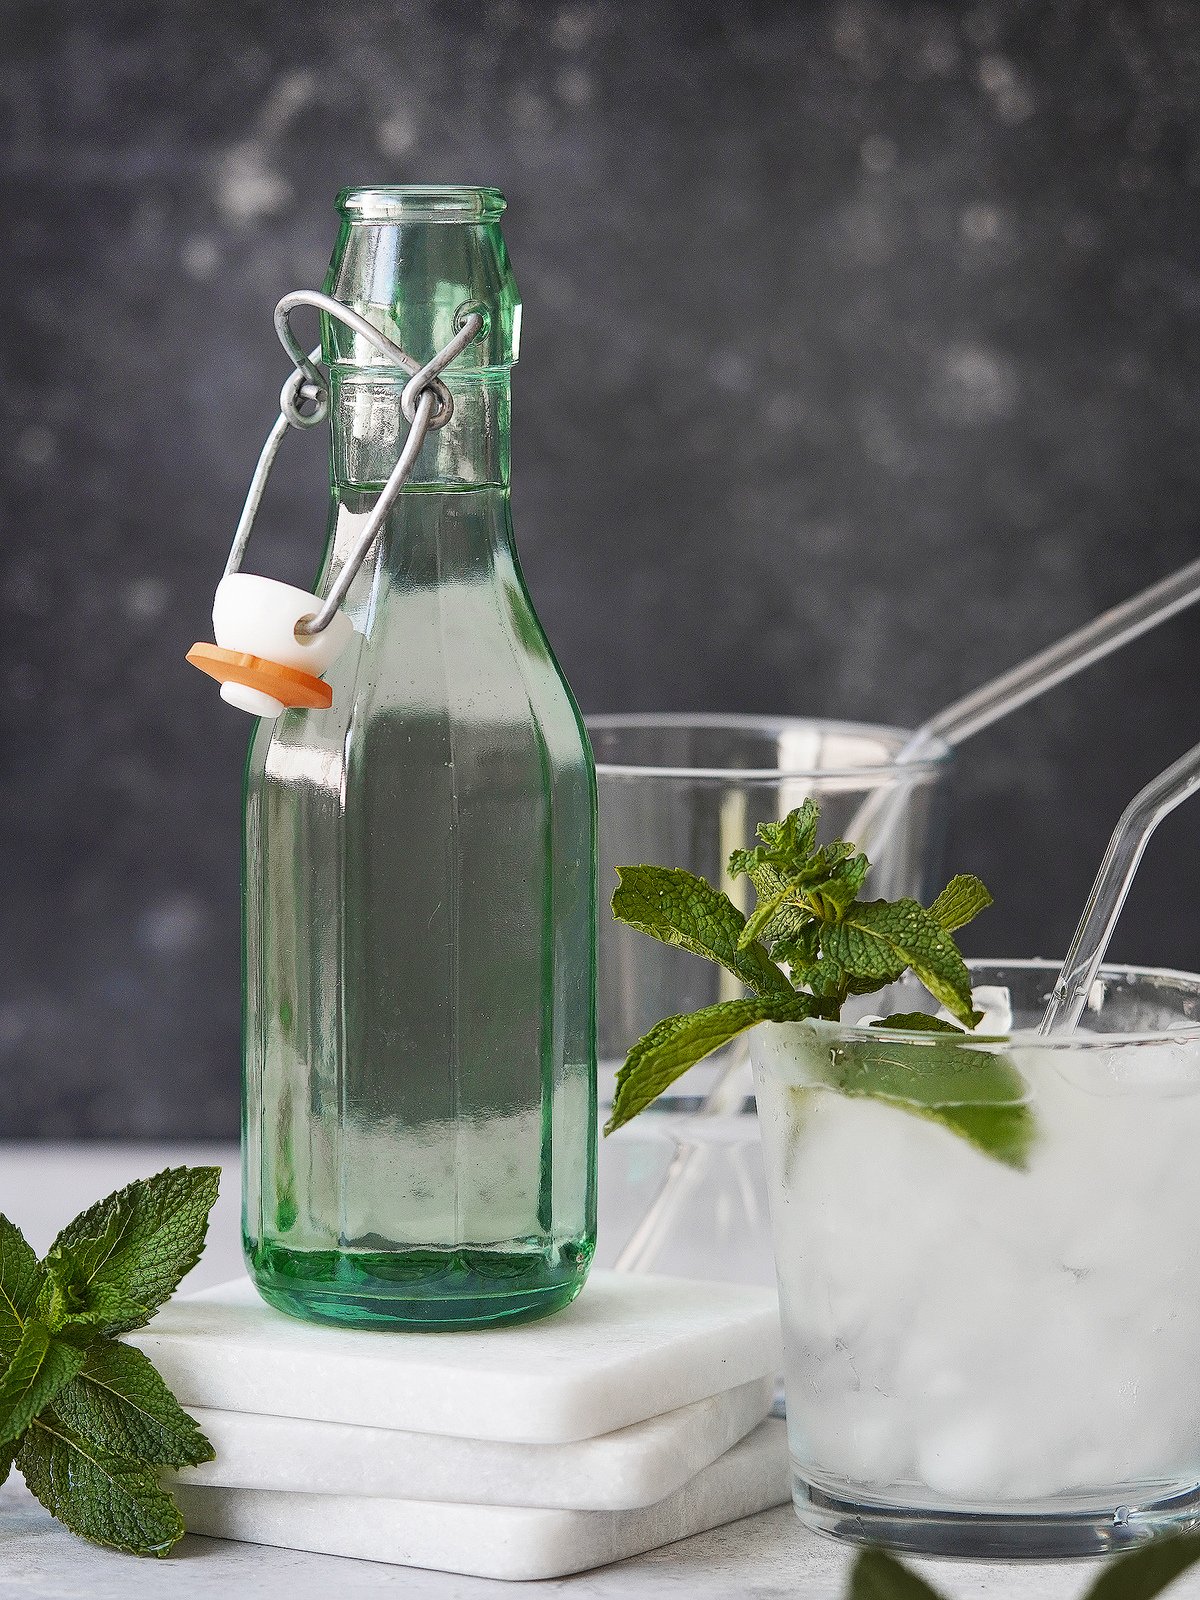 A green bottle with clear simply syrup. with mint as garnish